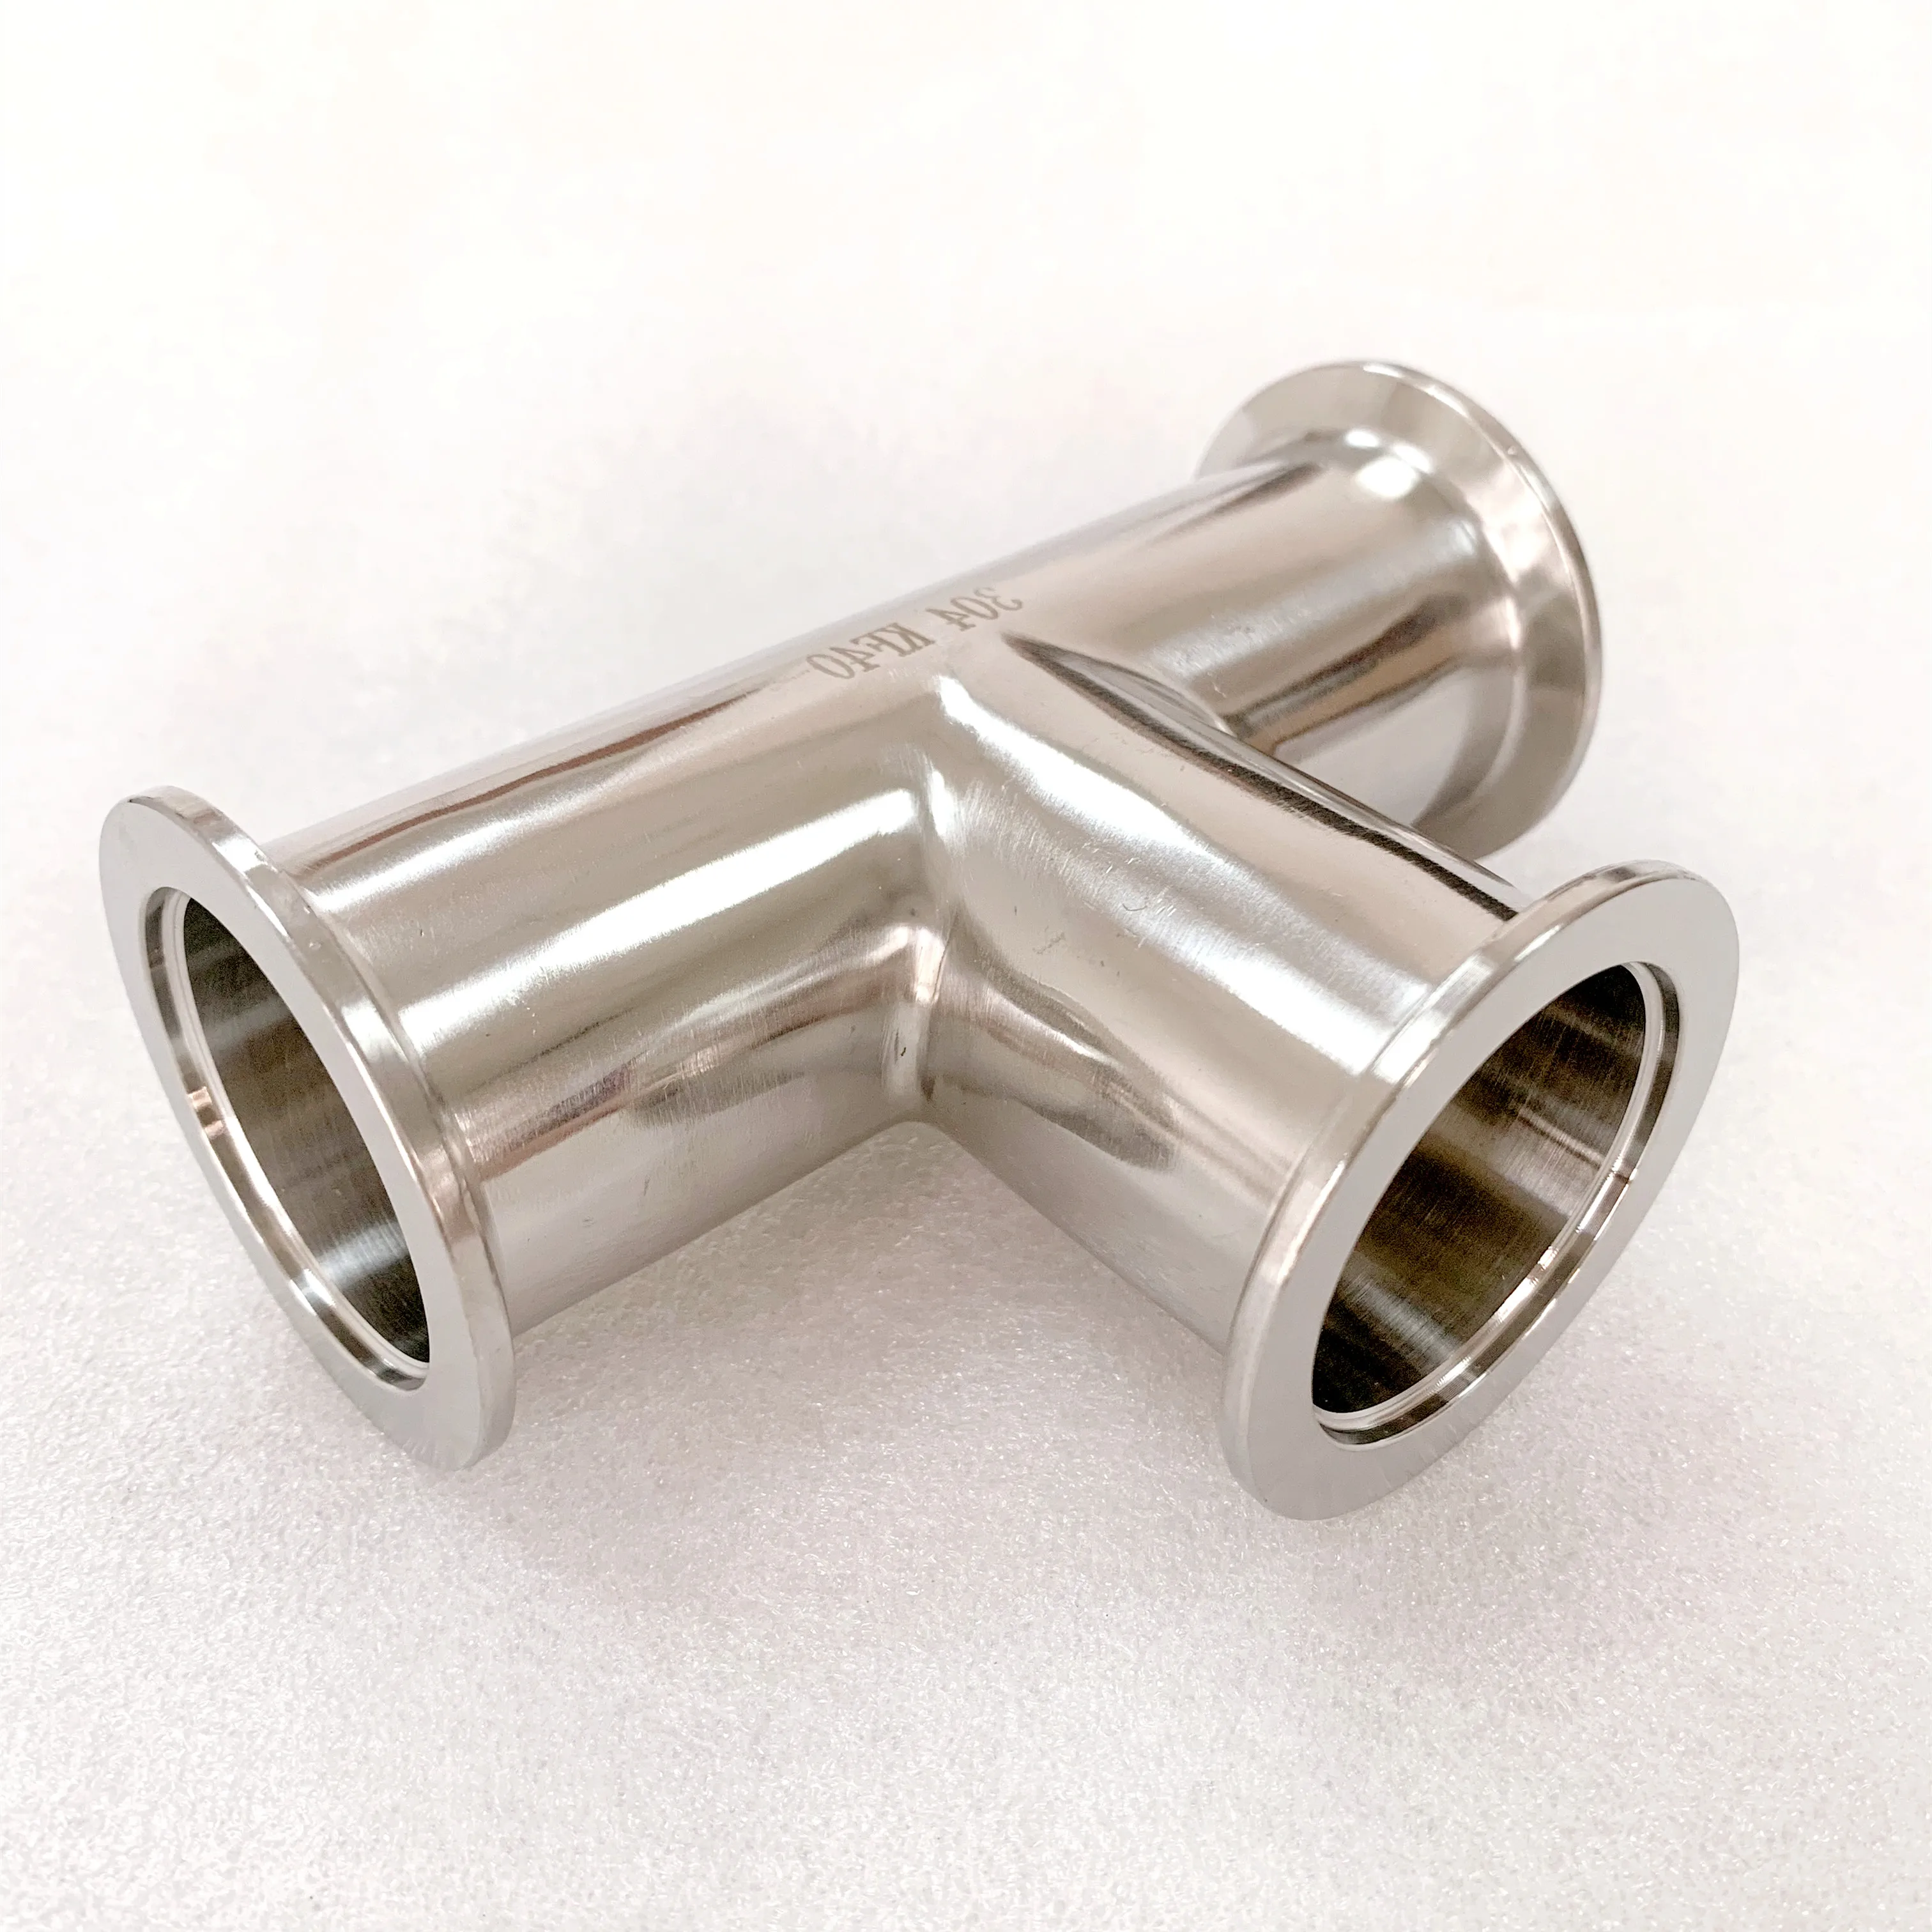 1PCS 304 Stainless Steel quick Flange Fitting KF40 Flange Size Vacuum Plumbing 